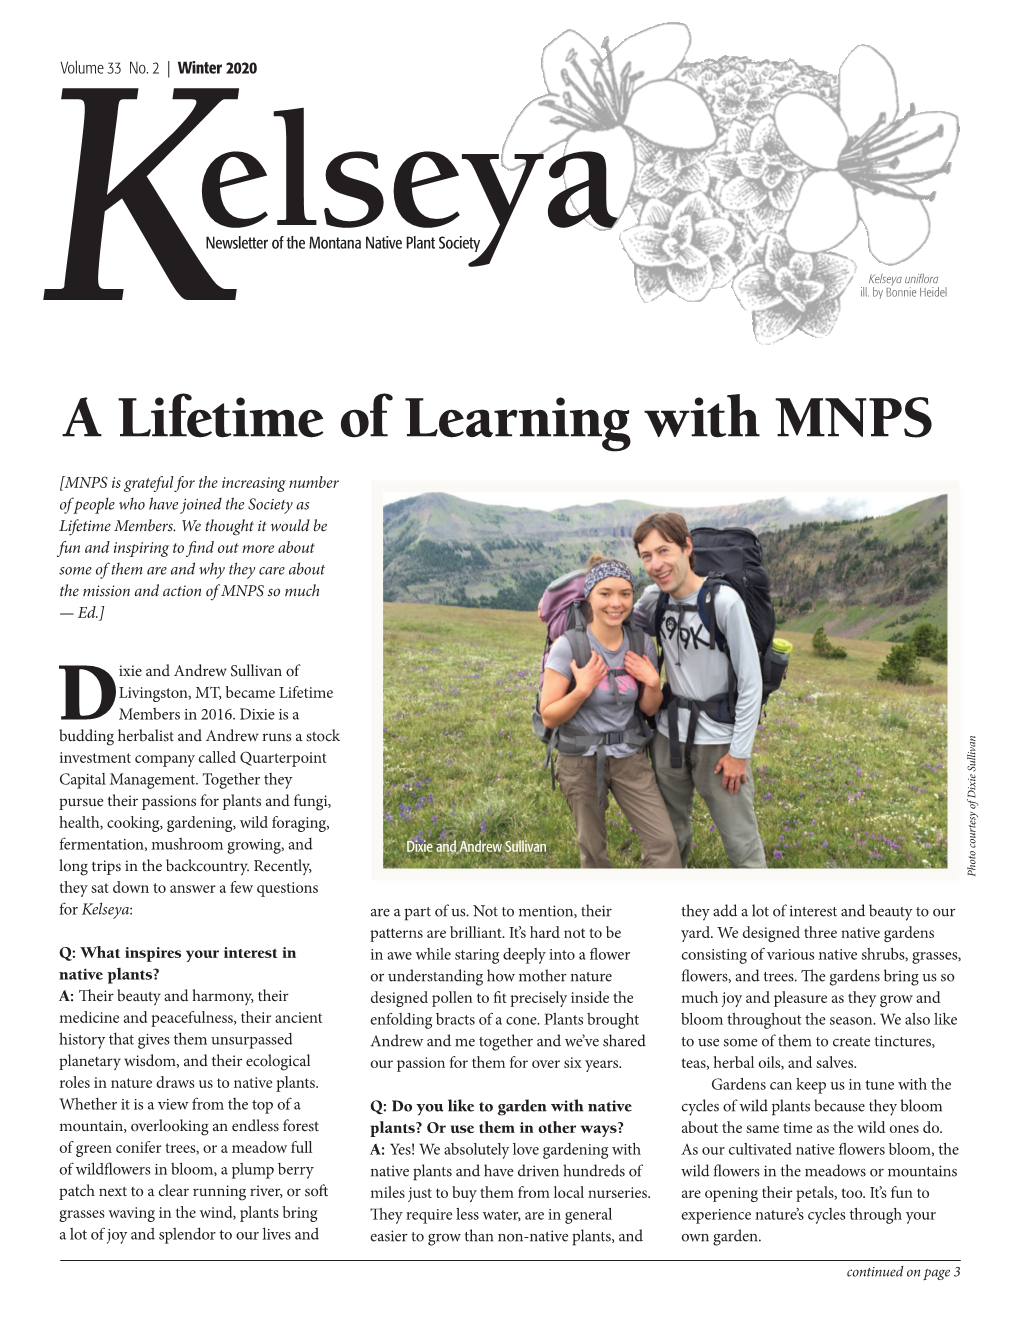 A Lifetime of Learning with MNPS